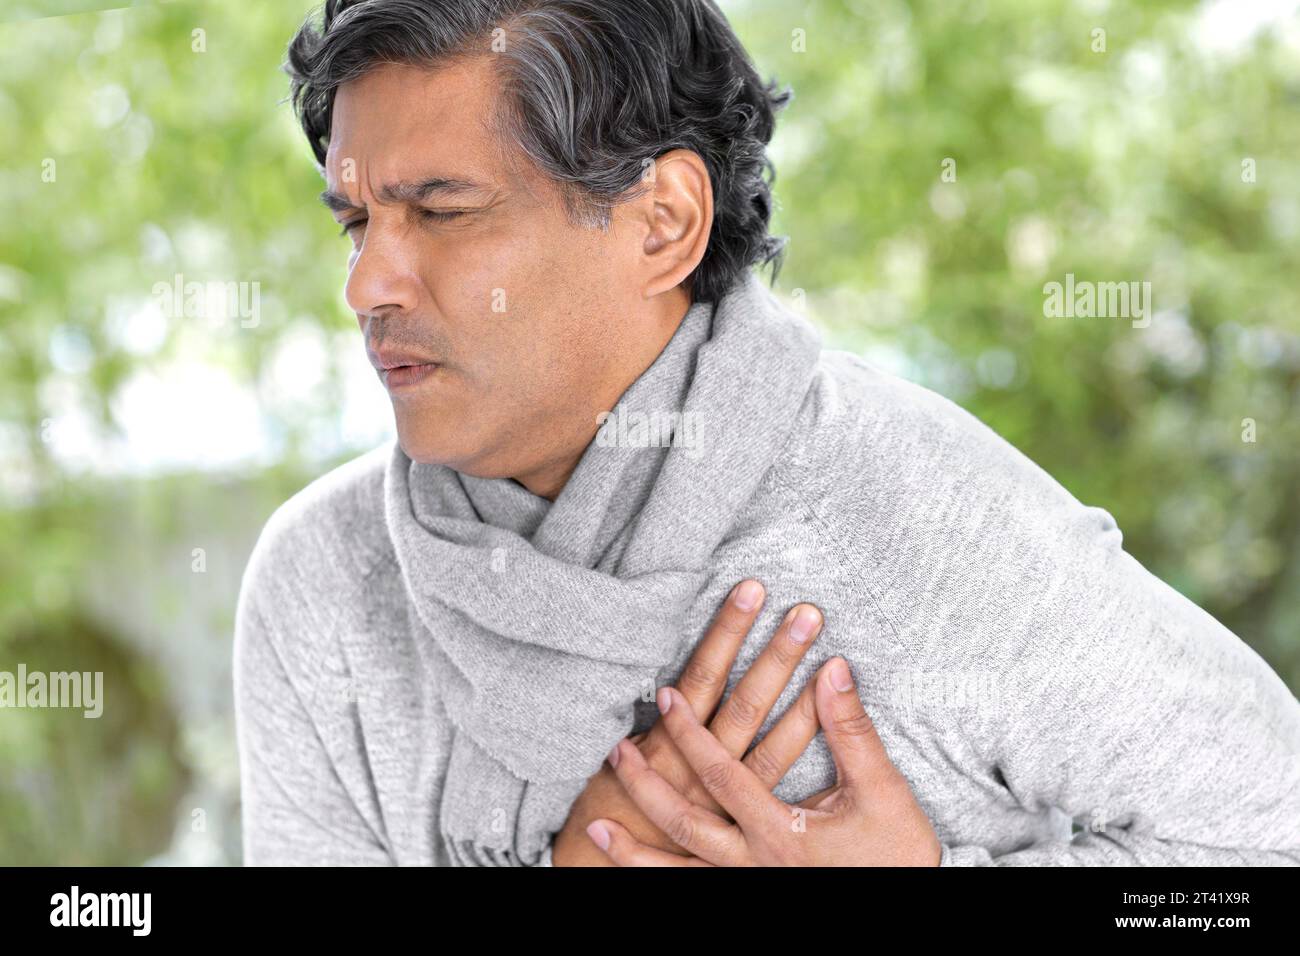 Man with chest pain Stock Photo